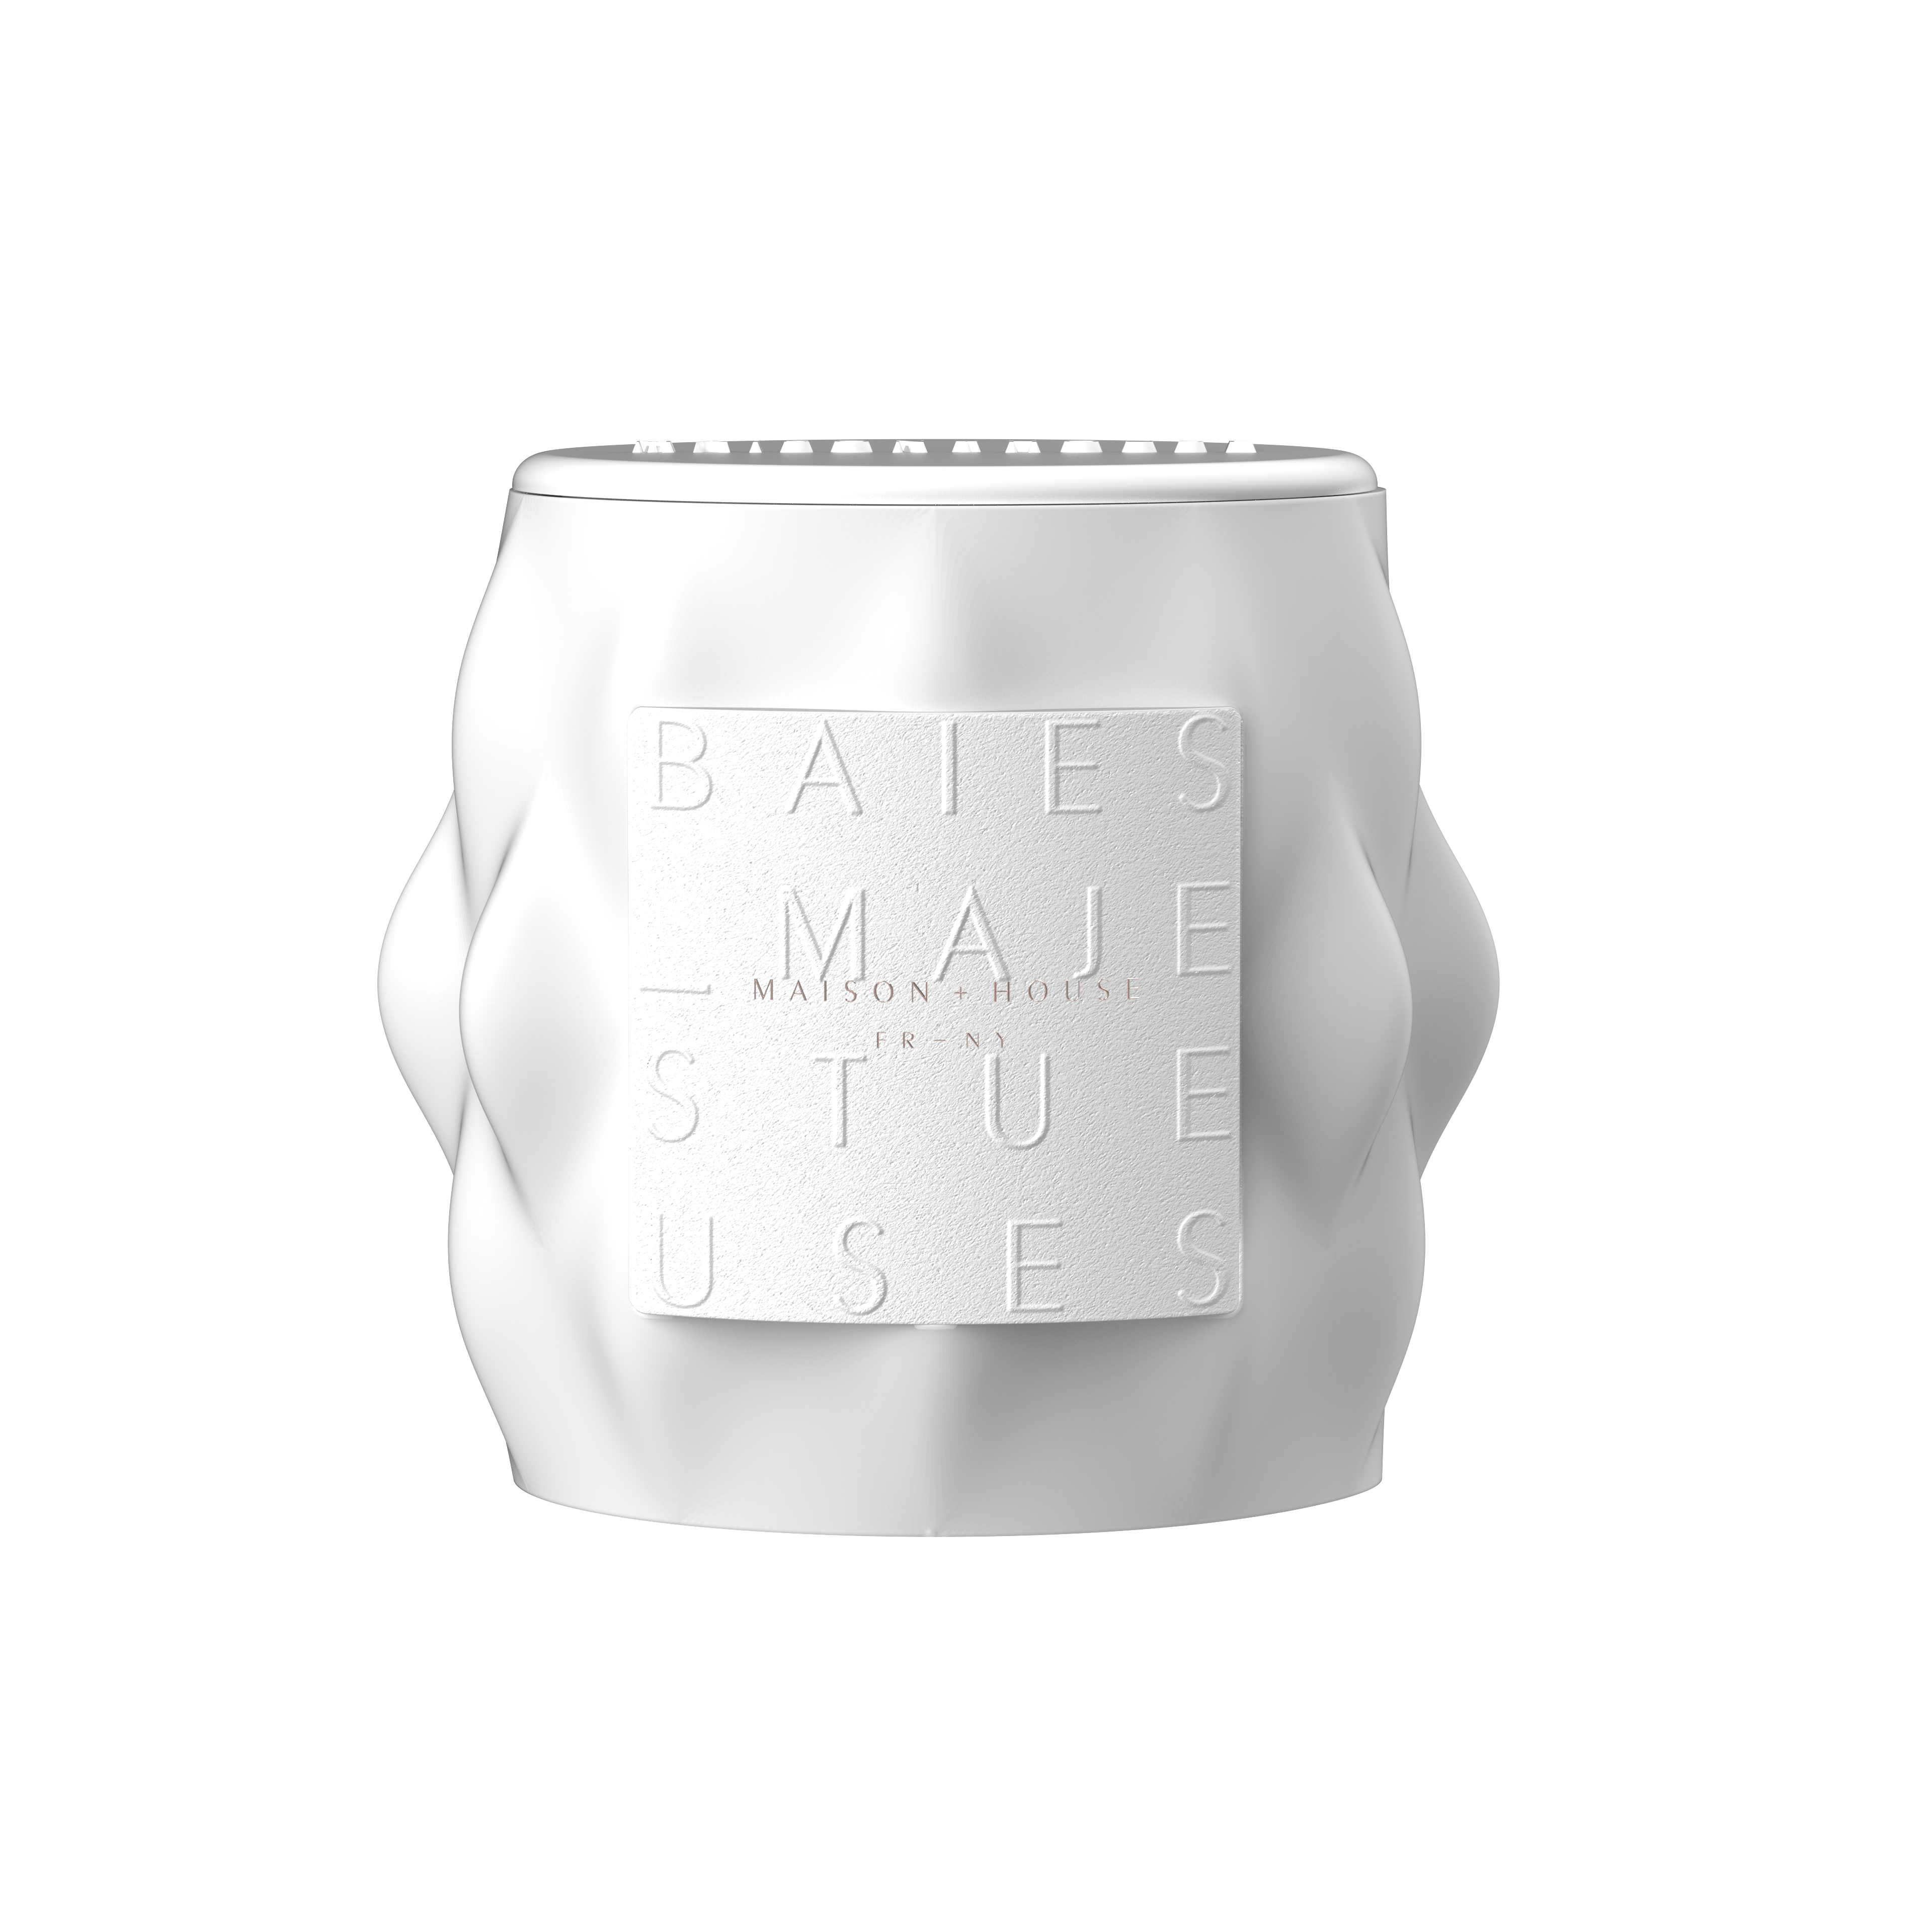 Maison+House Majestic Currant / Baies Majestueux Artisanal French-Fragrance Candle in Limoges Porcelain